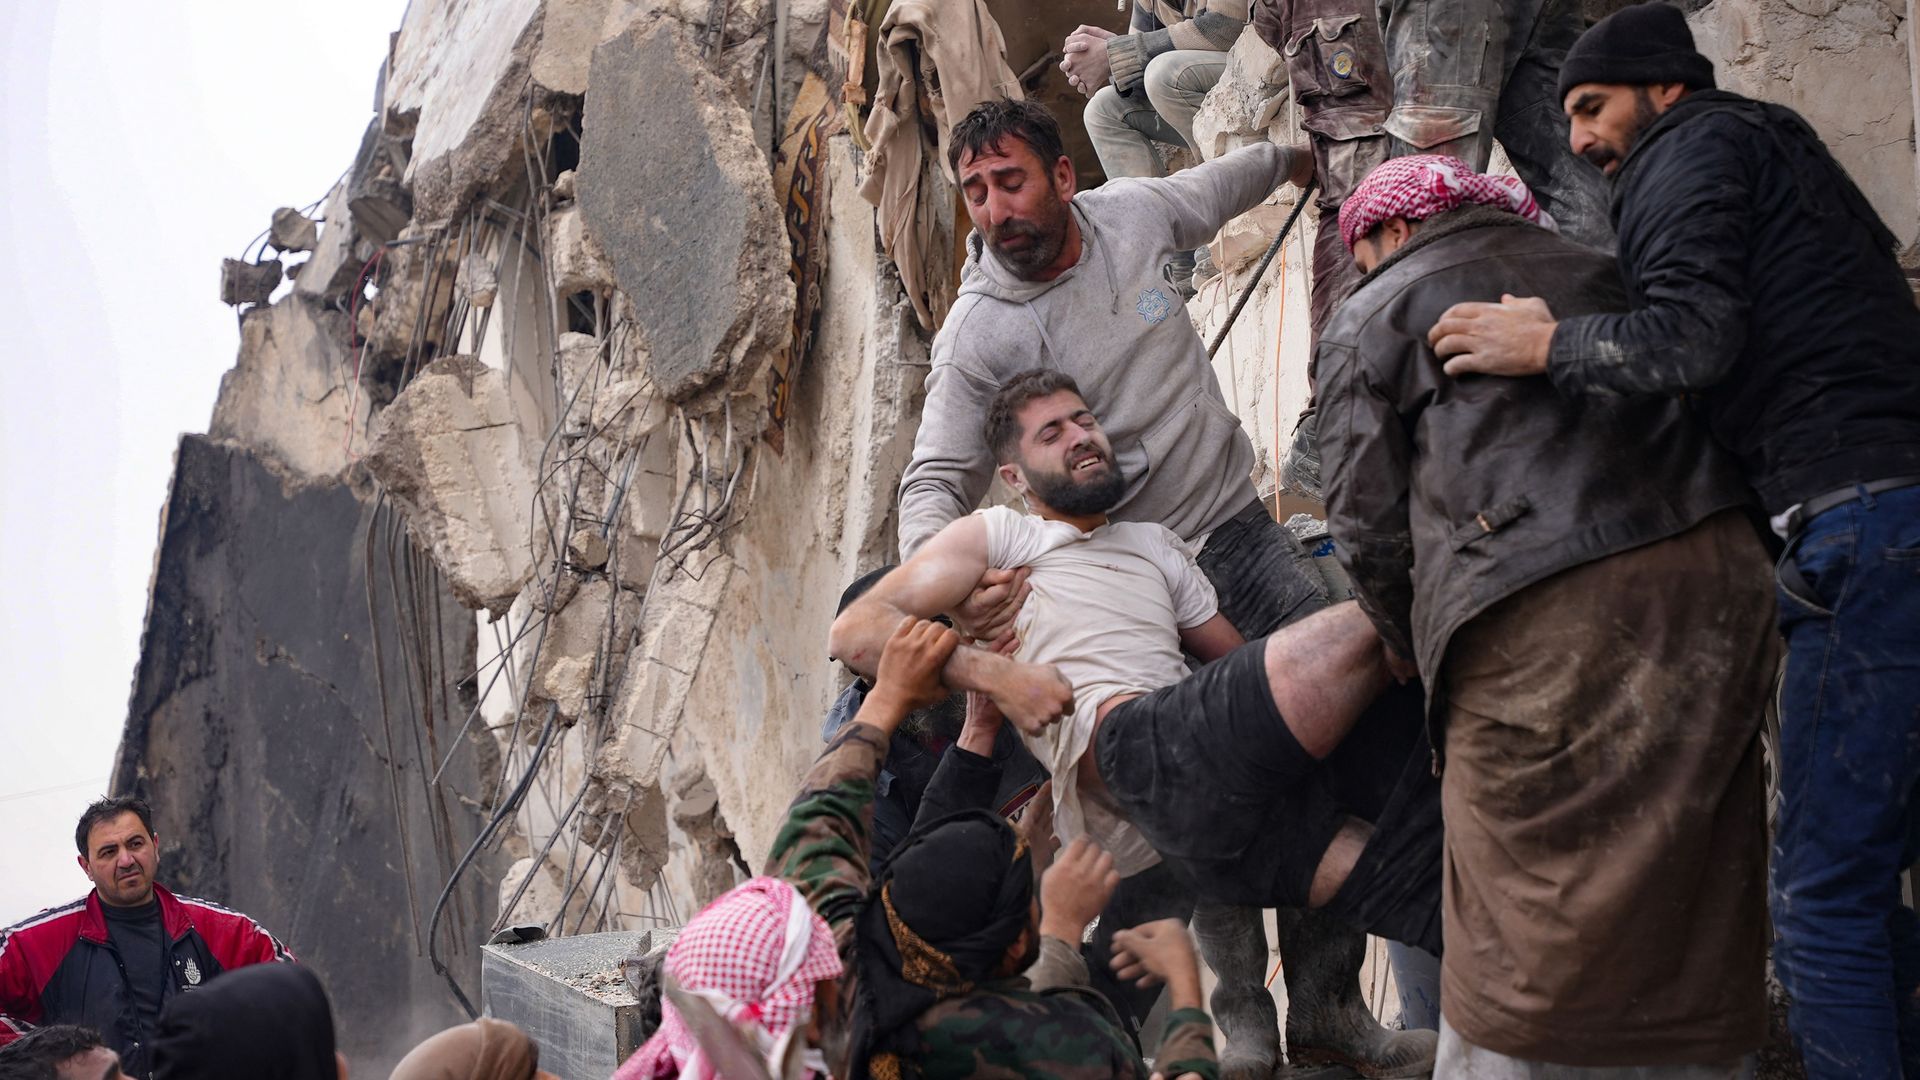 Residents retrieve an injured man from the rubble of a collapsed building following an earthquake in the town of Jandaris, Syria, on February 6, 2023. 